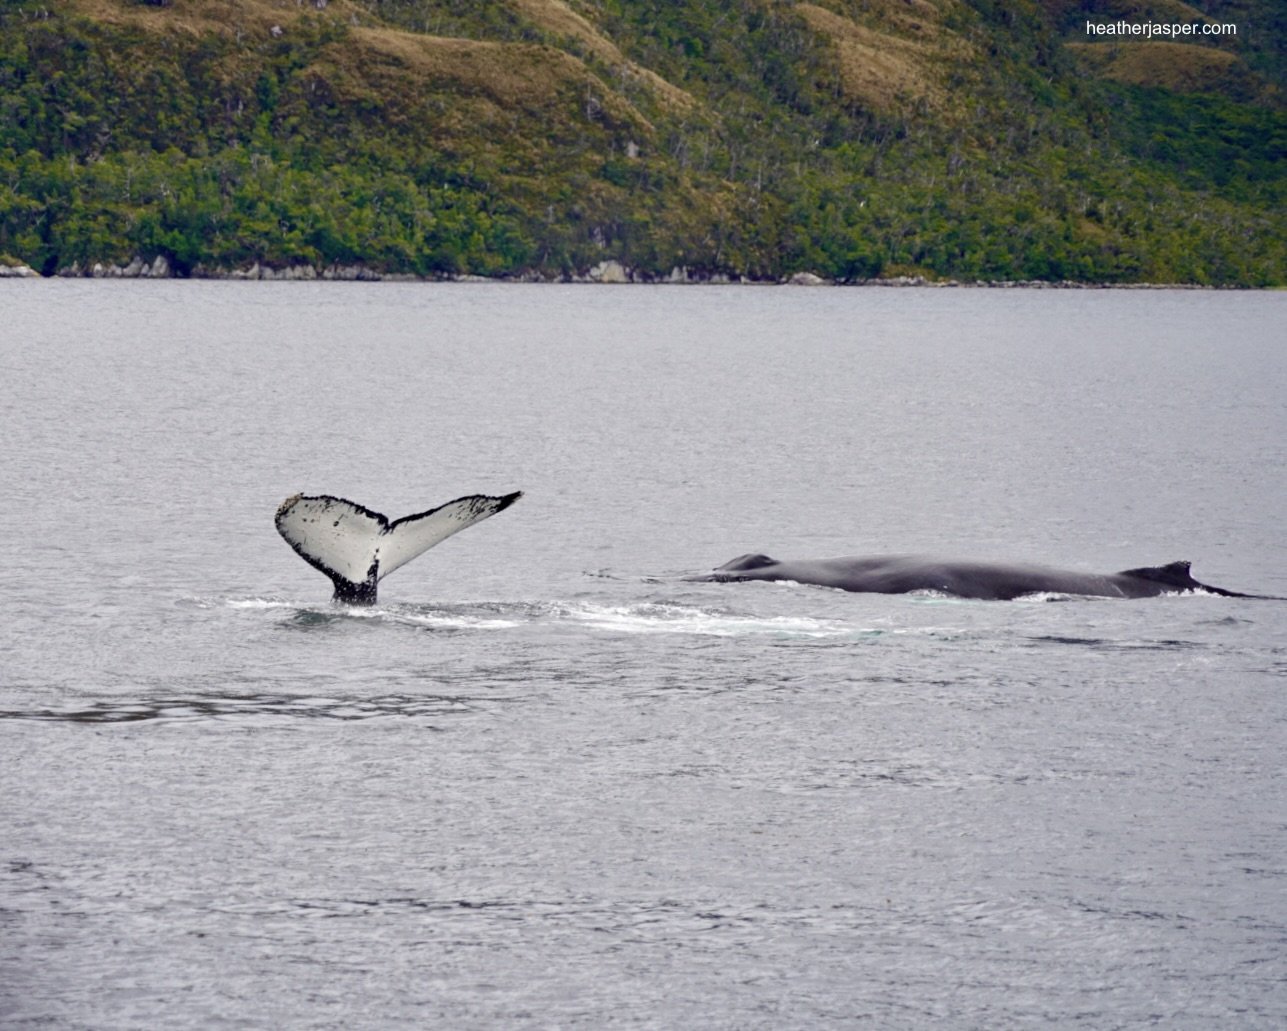 whale tail 09 and surfacing whale.JPG